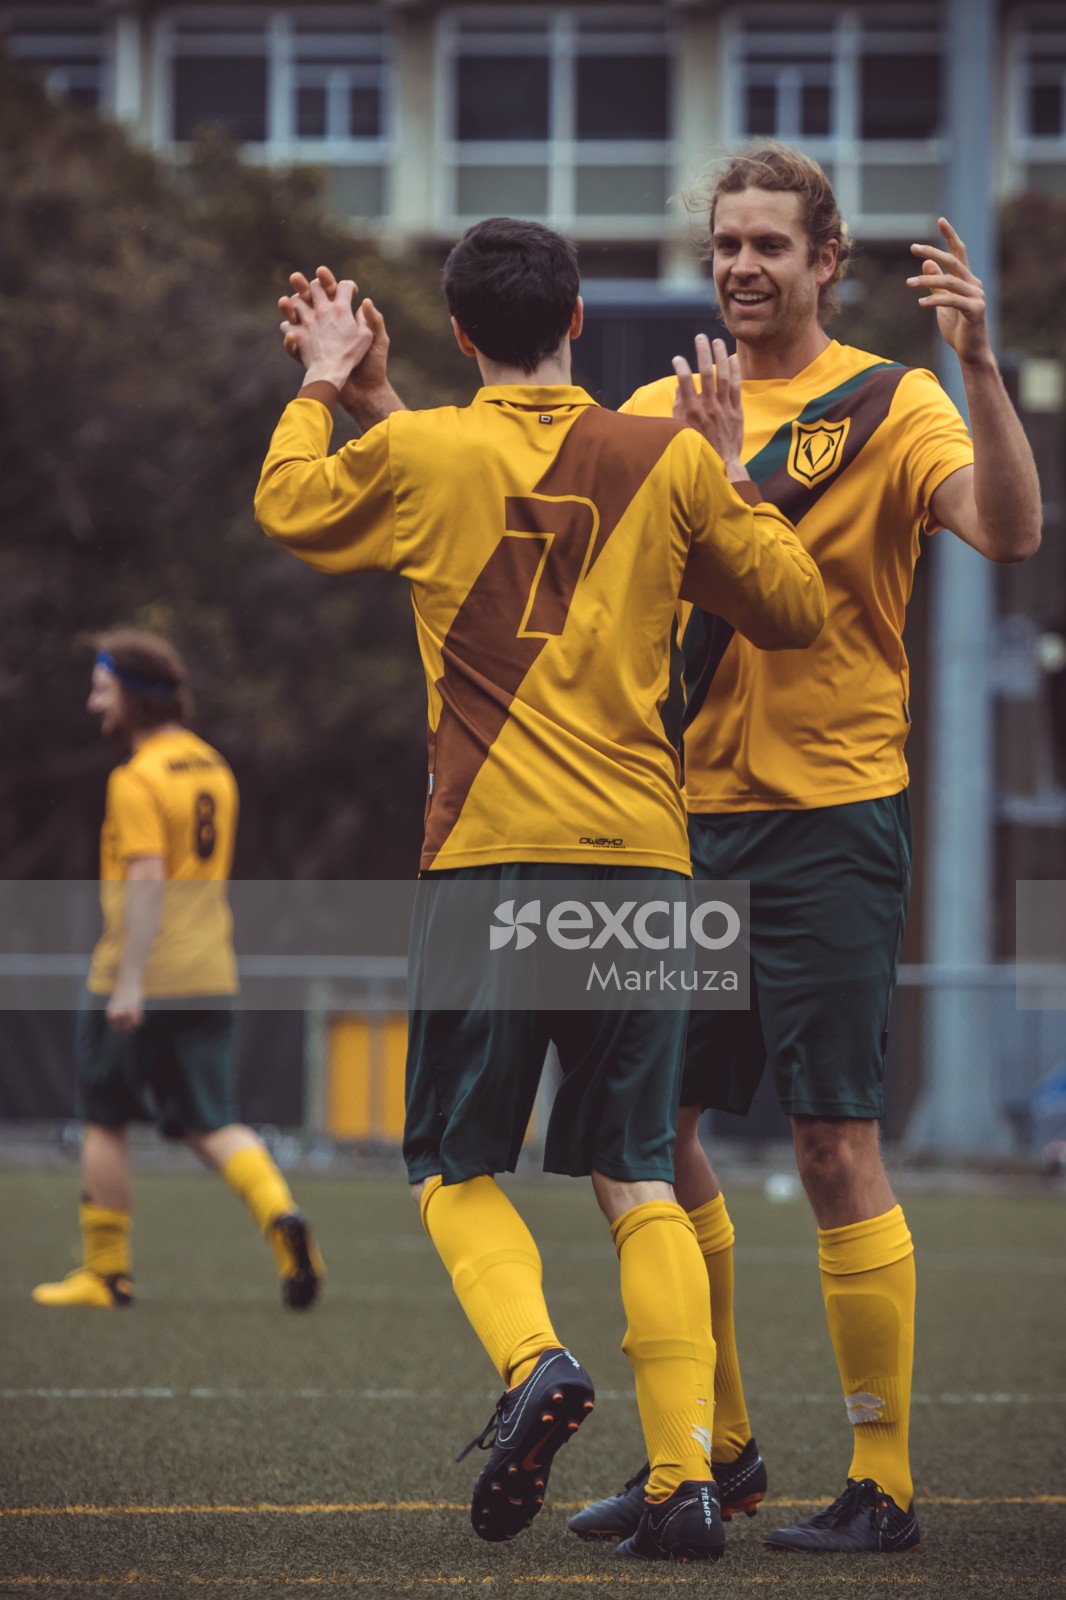 Two teammates celebrating after success - Sports Zone sunday league